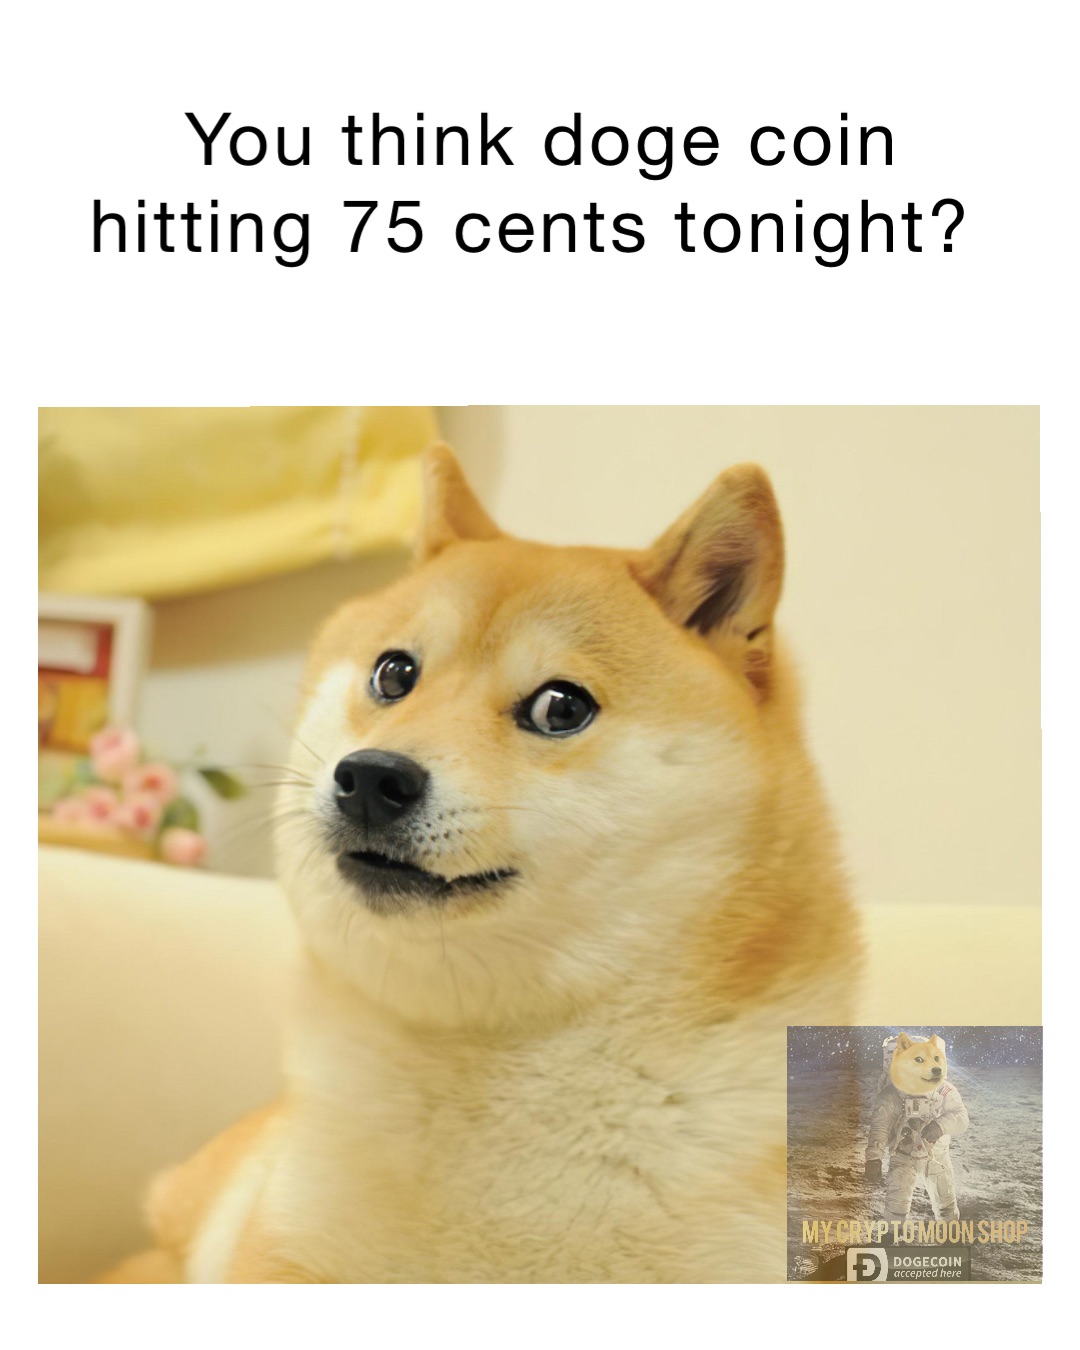 You think Doge Coin hitting 75 cents tonight?